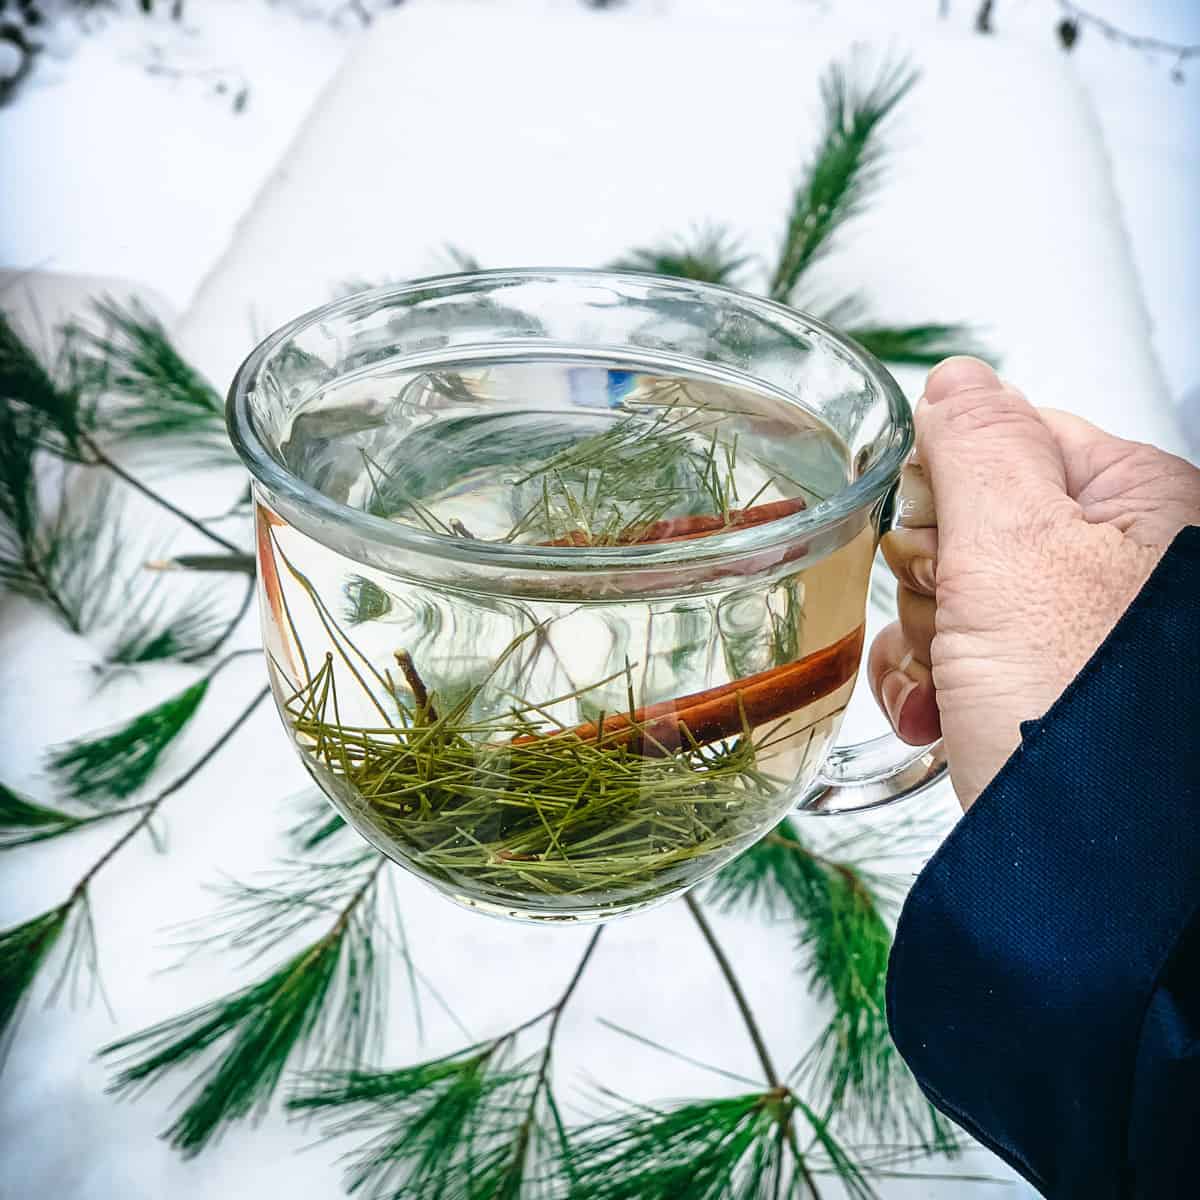 Pine Needle Tea with Pine, Spruce or Fir